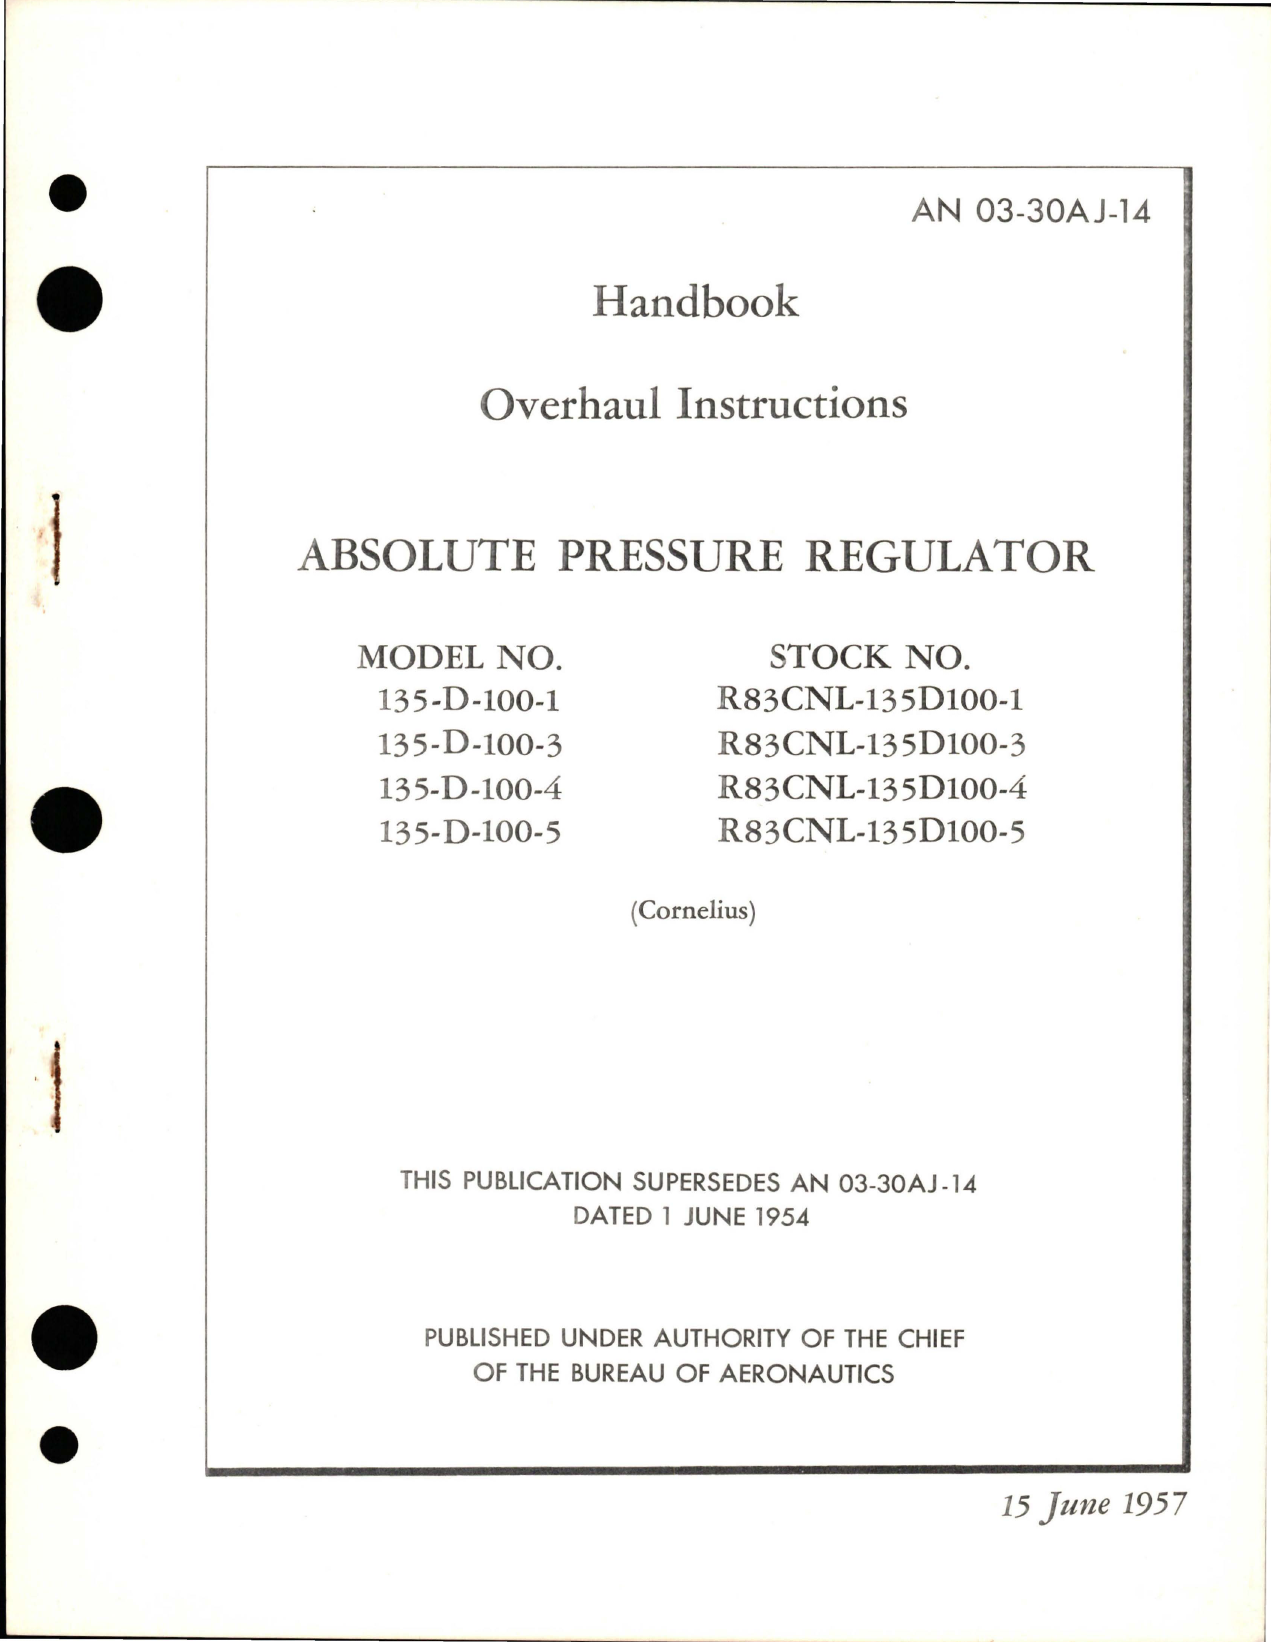 Sample page 1 from AirCorps Library document: Overhaul Instructions for Absolute Pressure Regulator - Models 135-D-100-1, 135-D-100-3, 135-D-100-4, and 135-D-100-5